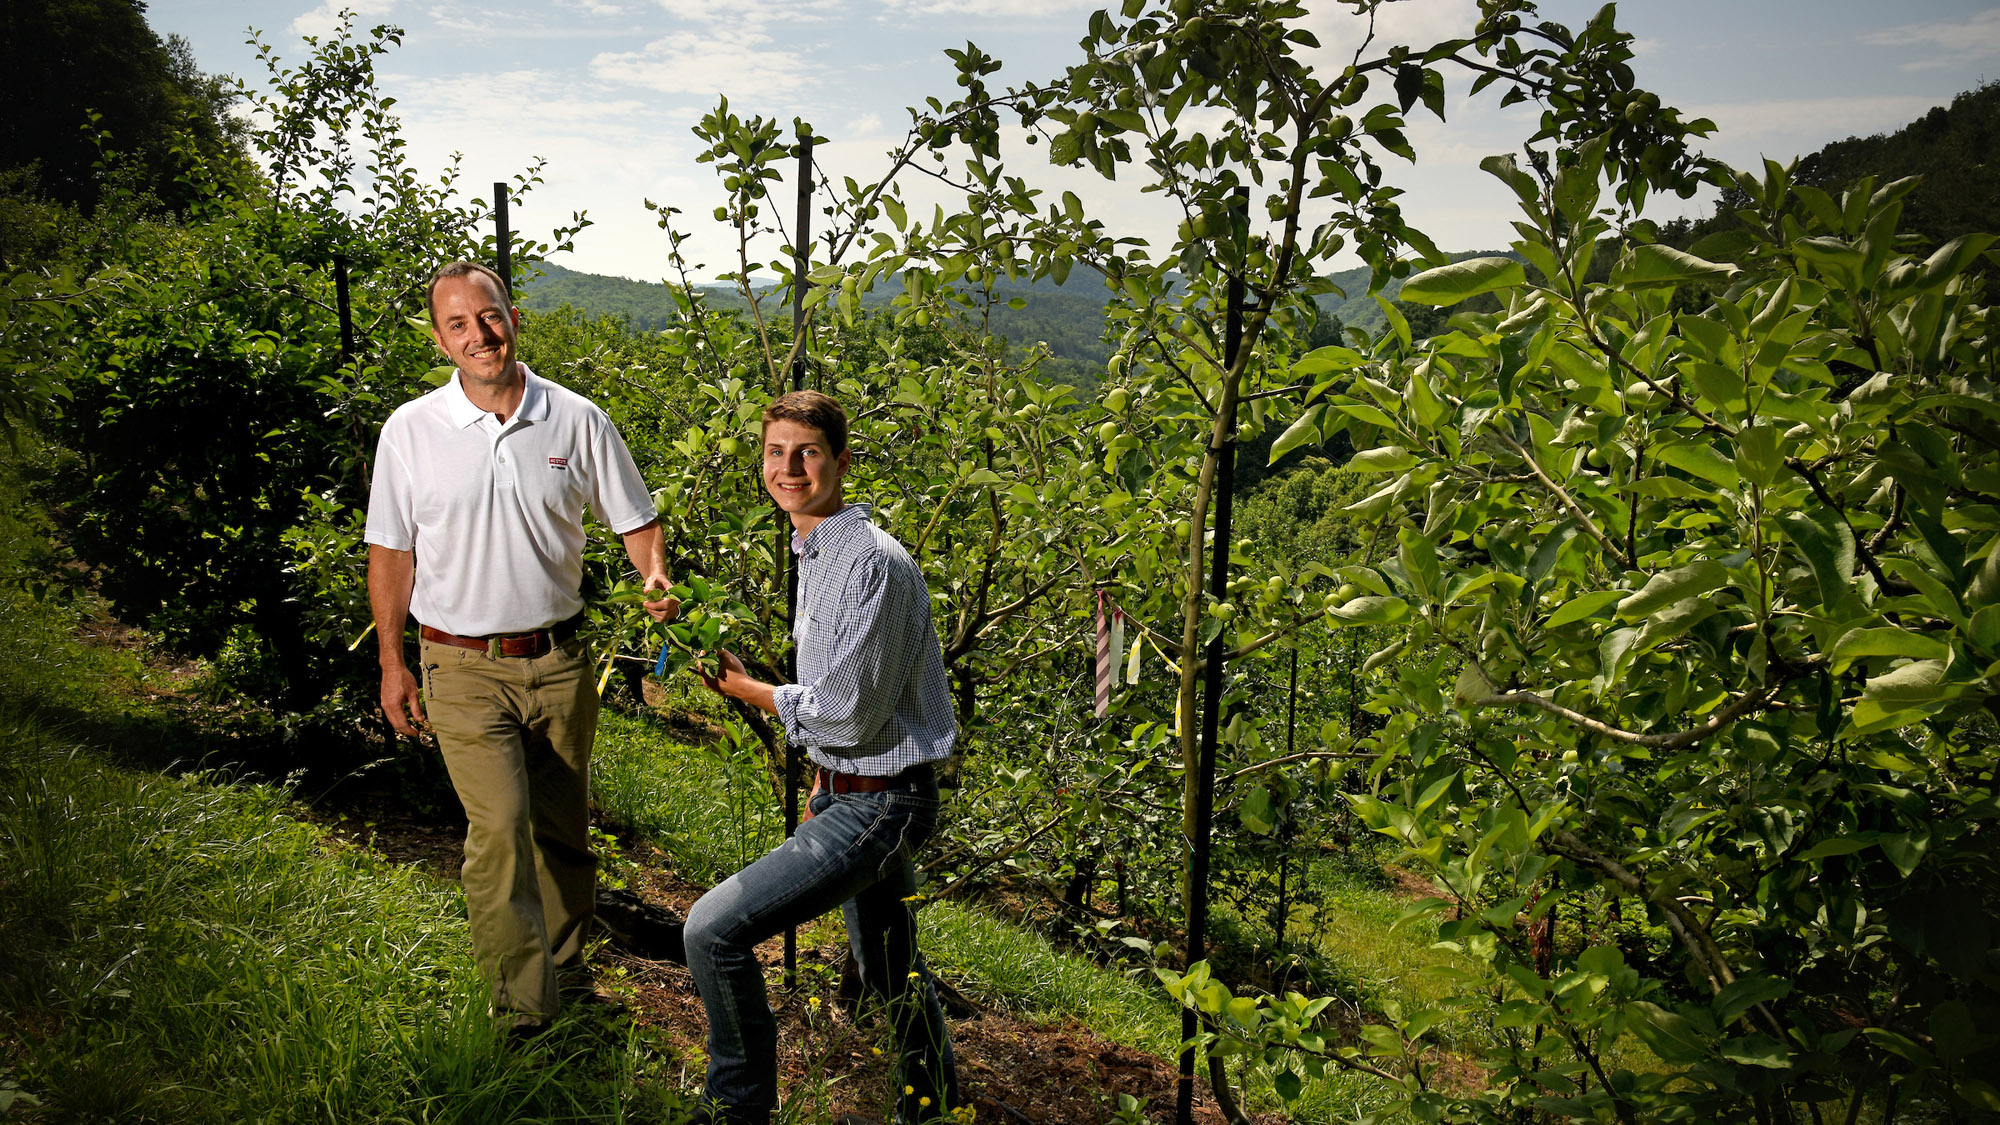 An NC State Extension expert is standing with a student in front of apple trees at an orchard in North Carolina.